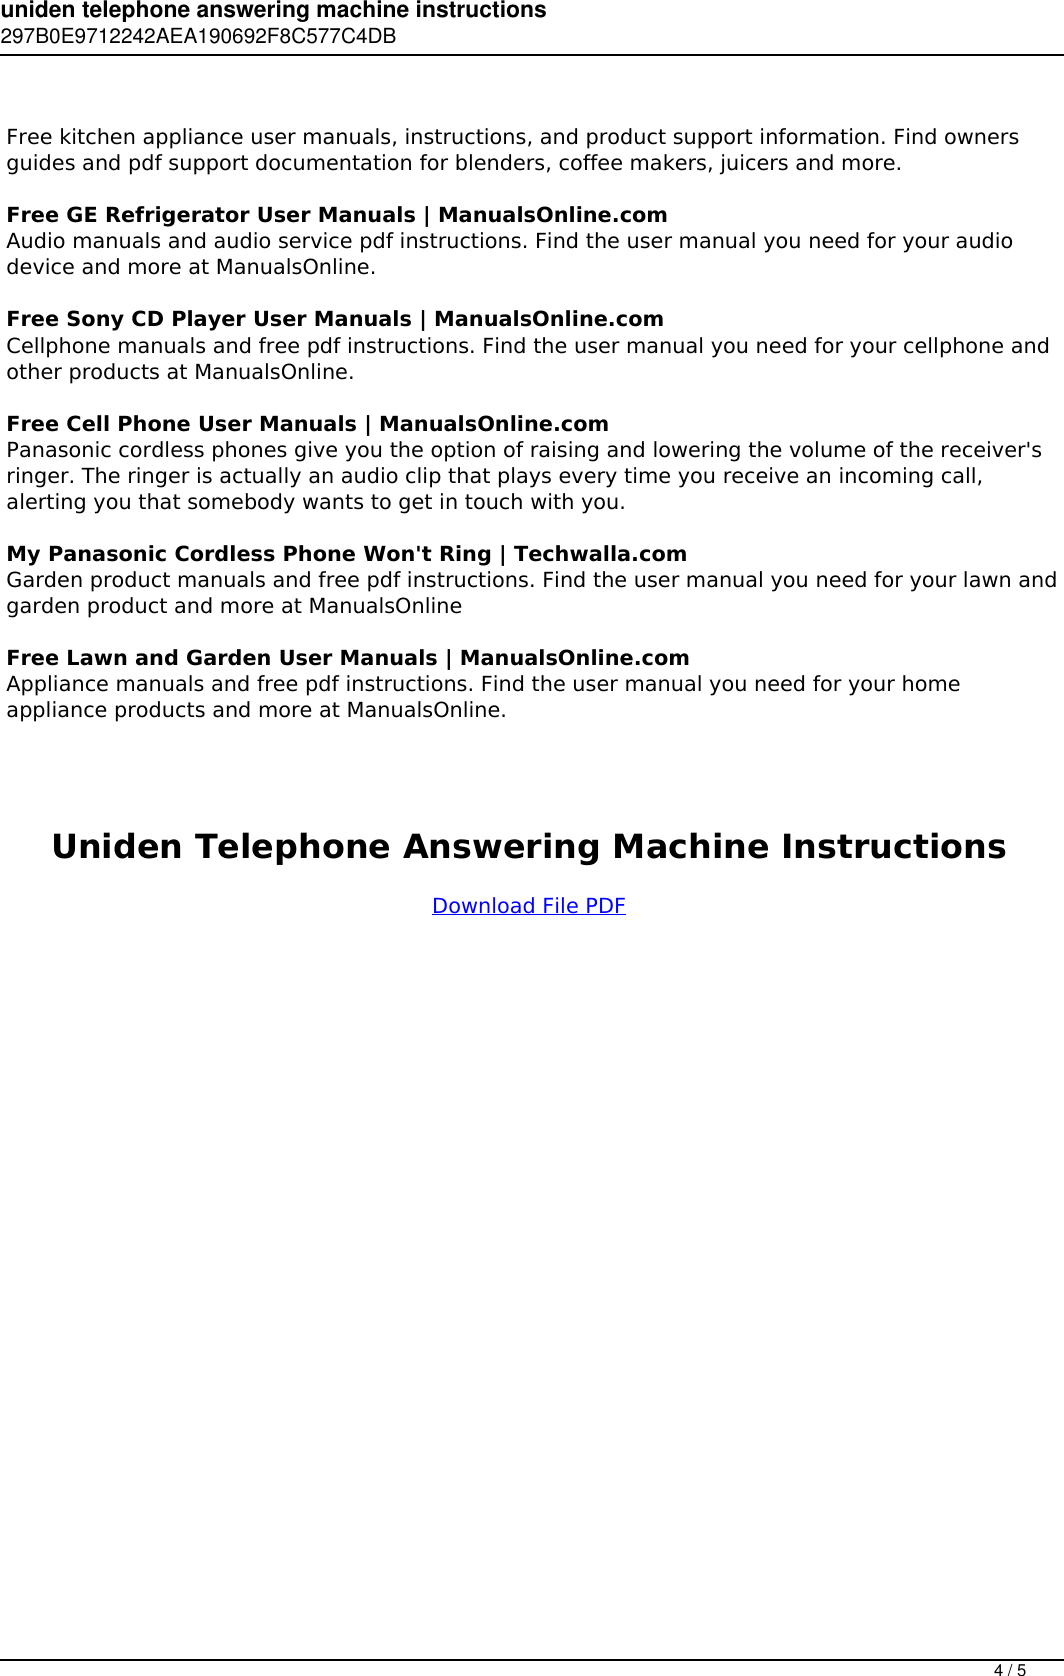 Page 4 of 5 - Uniden Telephone Answering Machine Instructions